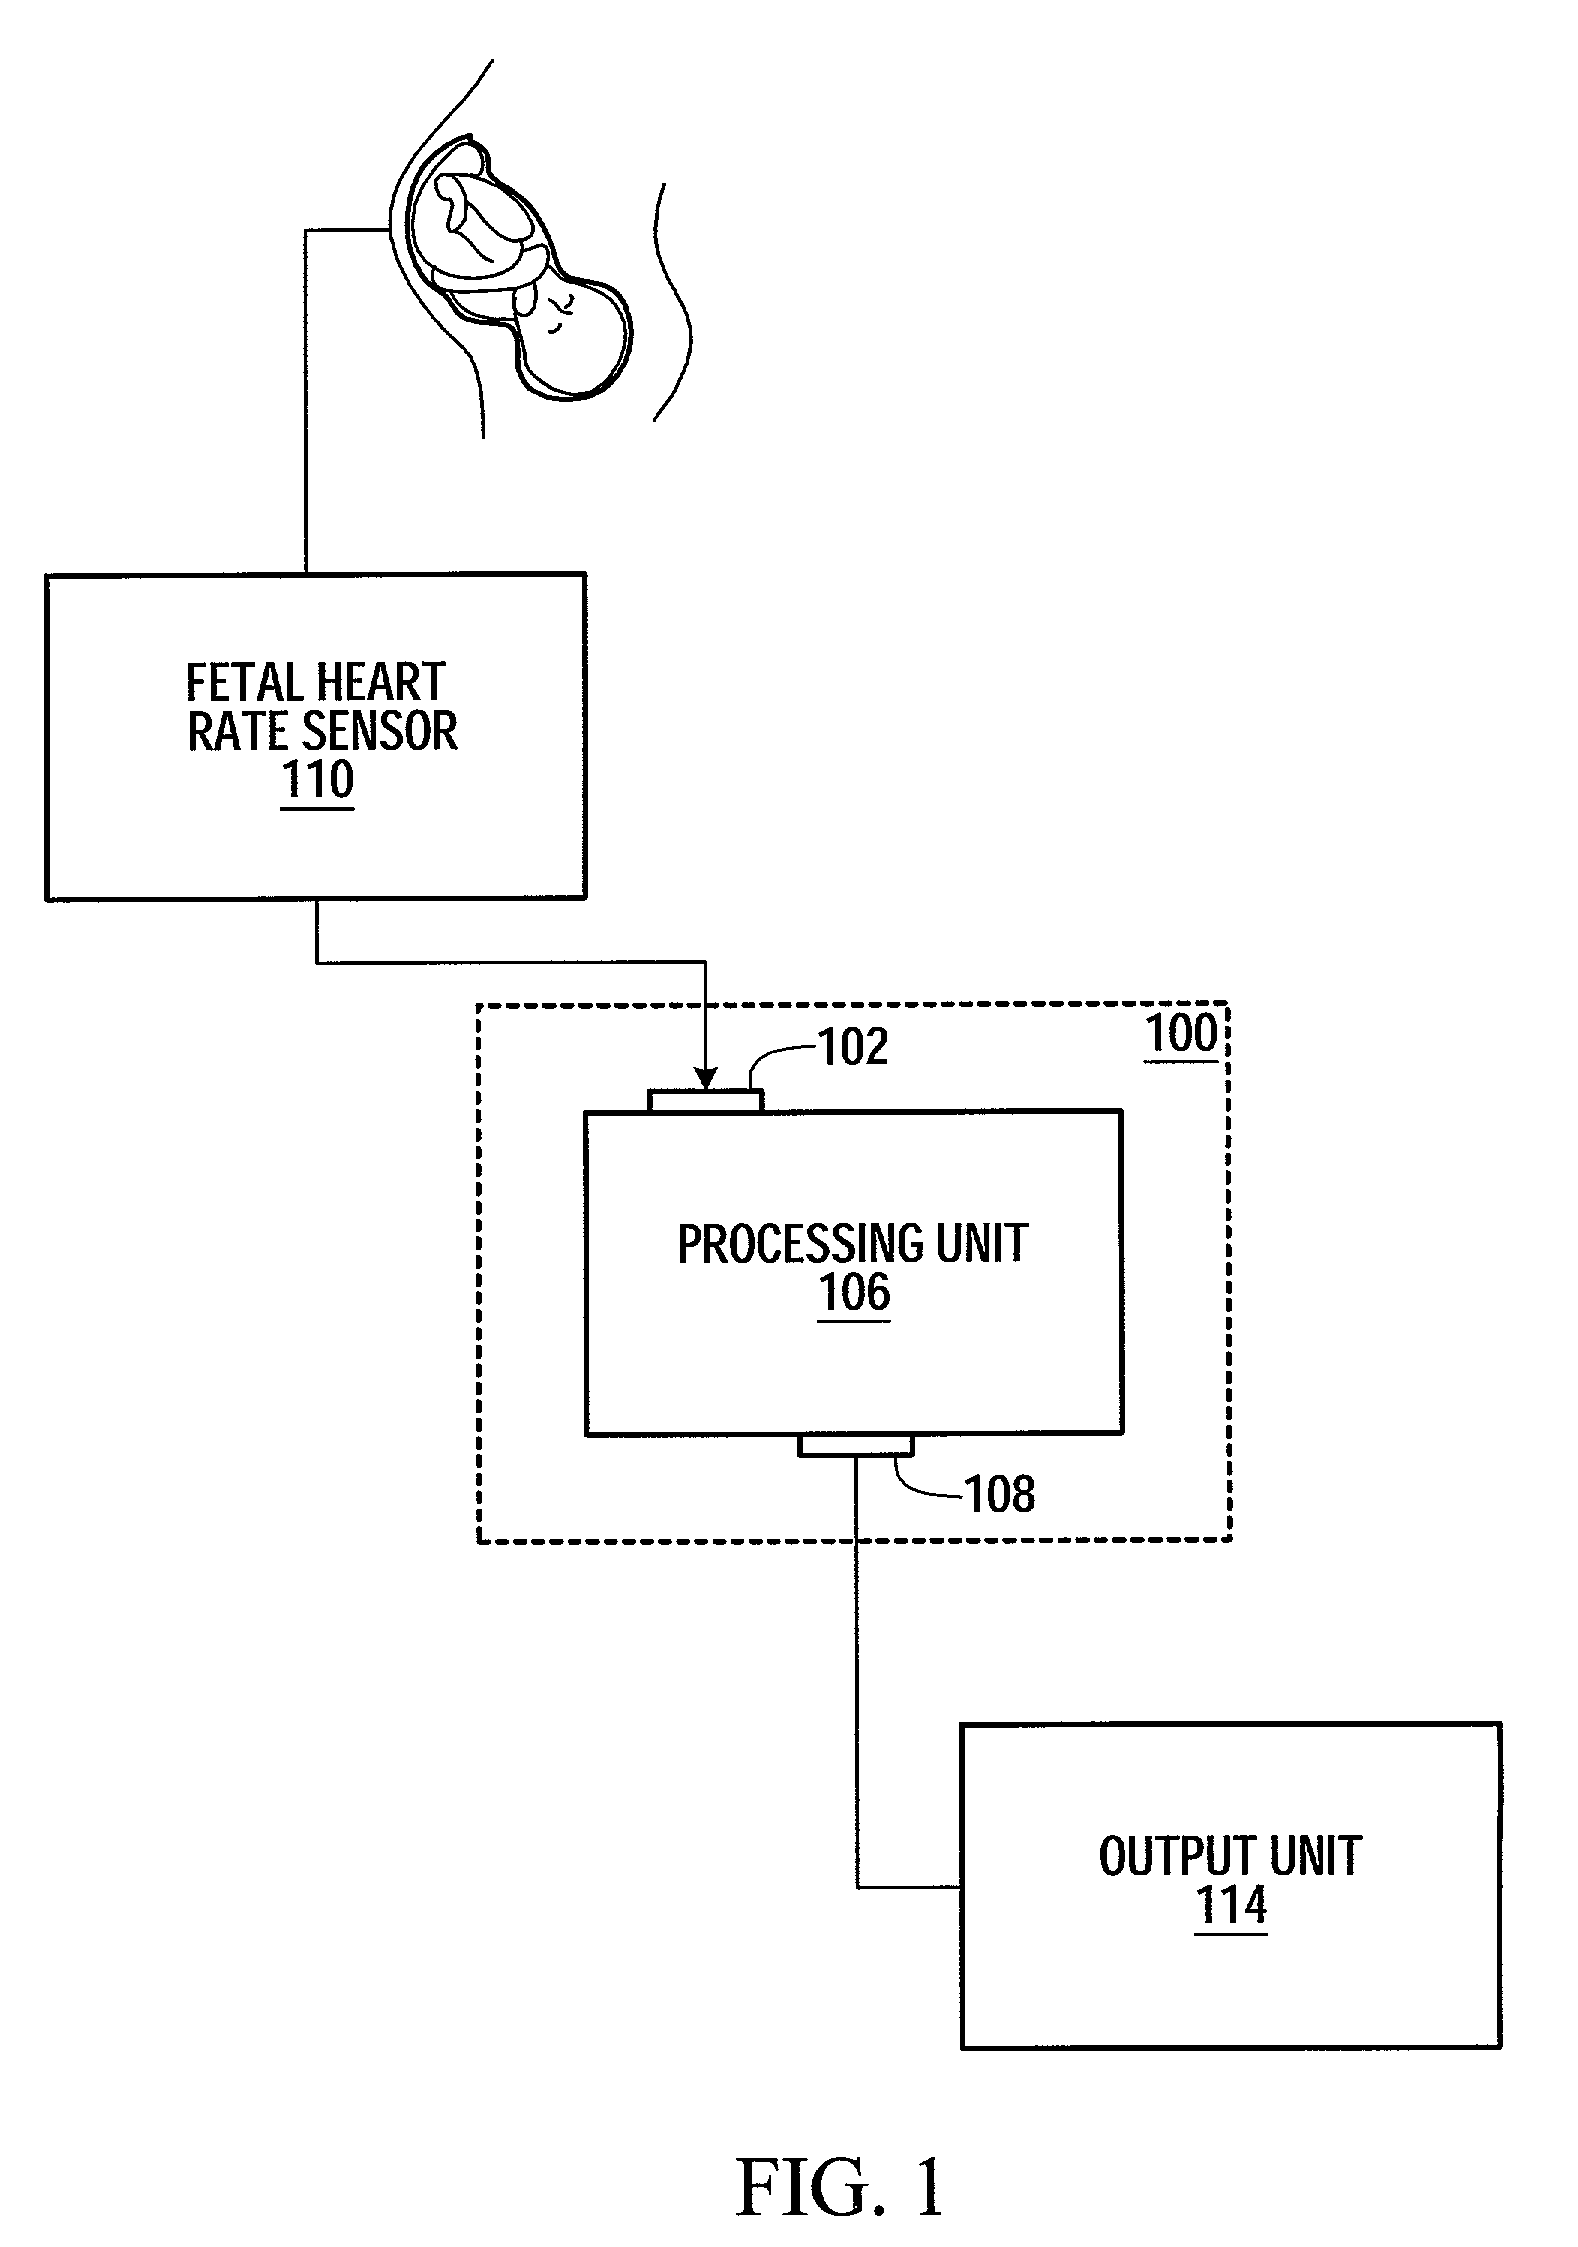 Method and apparatus for monitoring the condition of a fetus